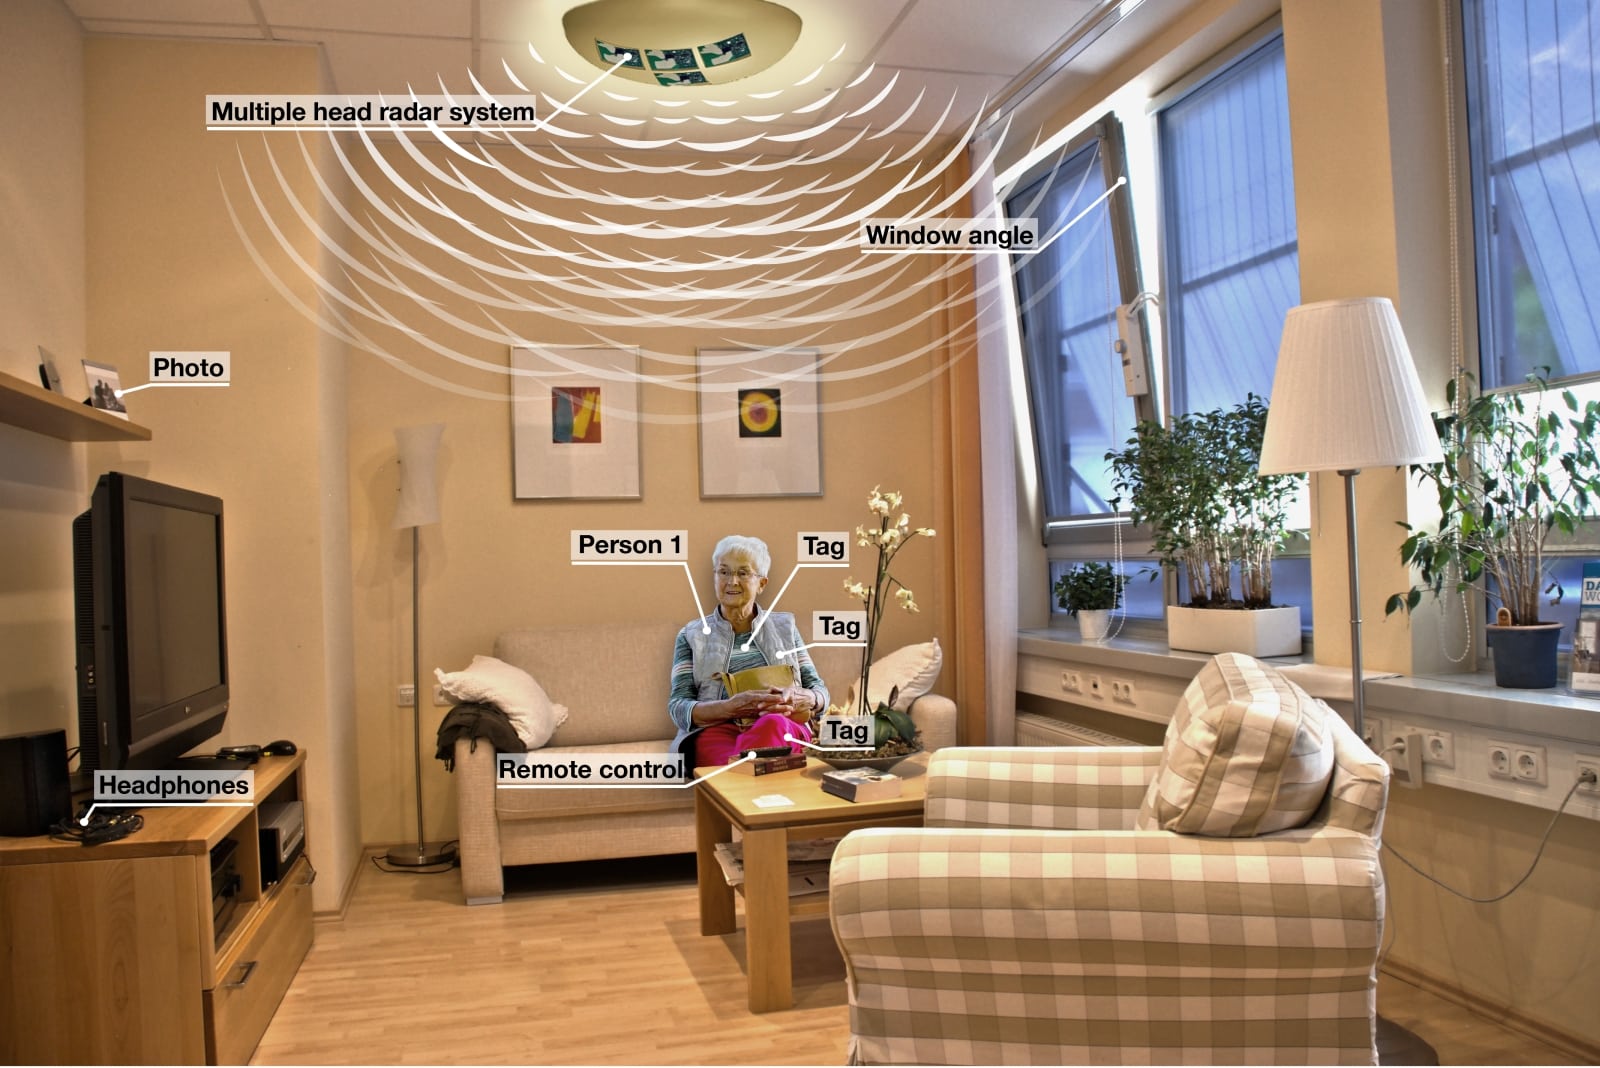 New Technology for Networking and Localizing Everyday Indoor Objects